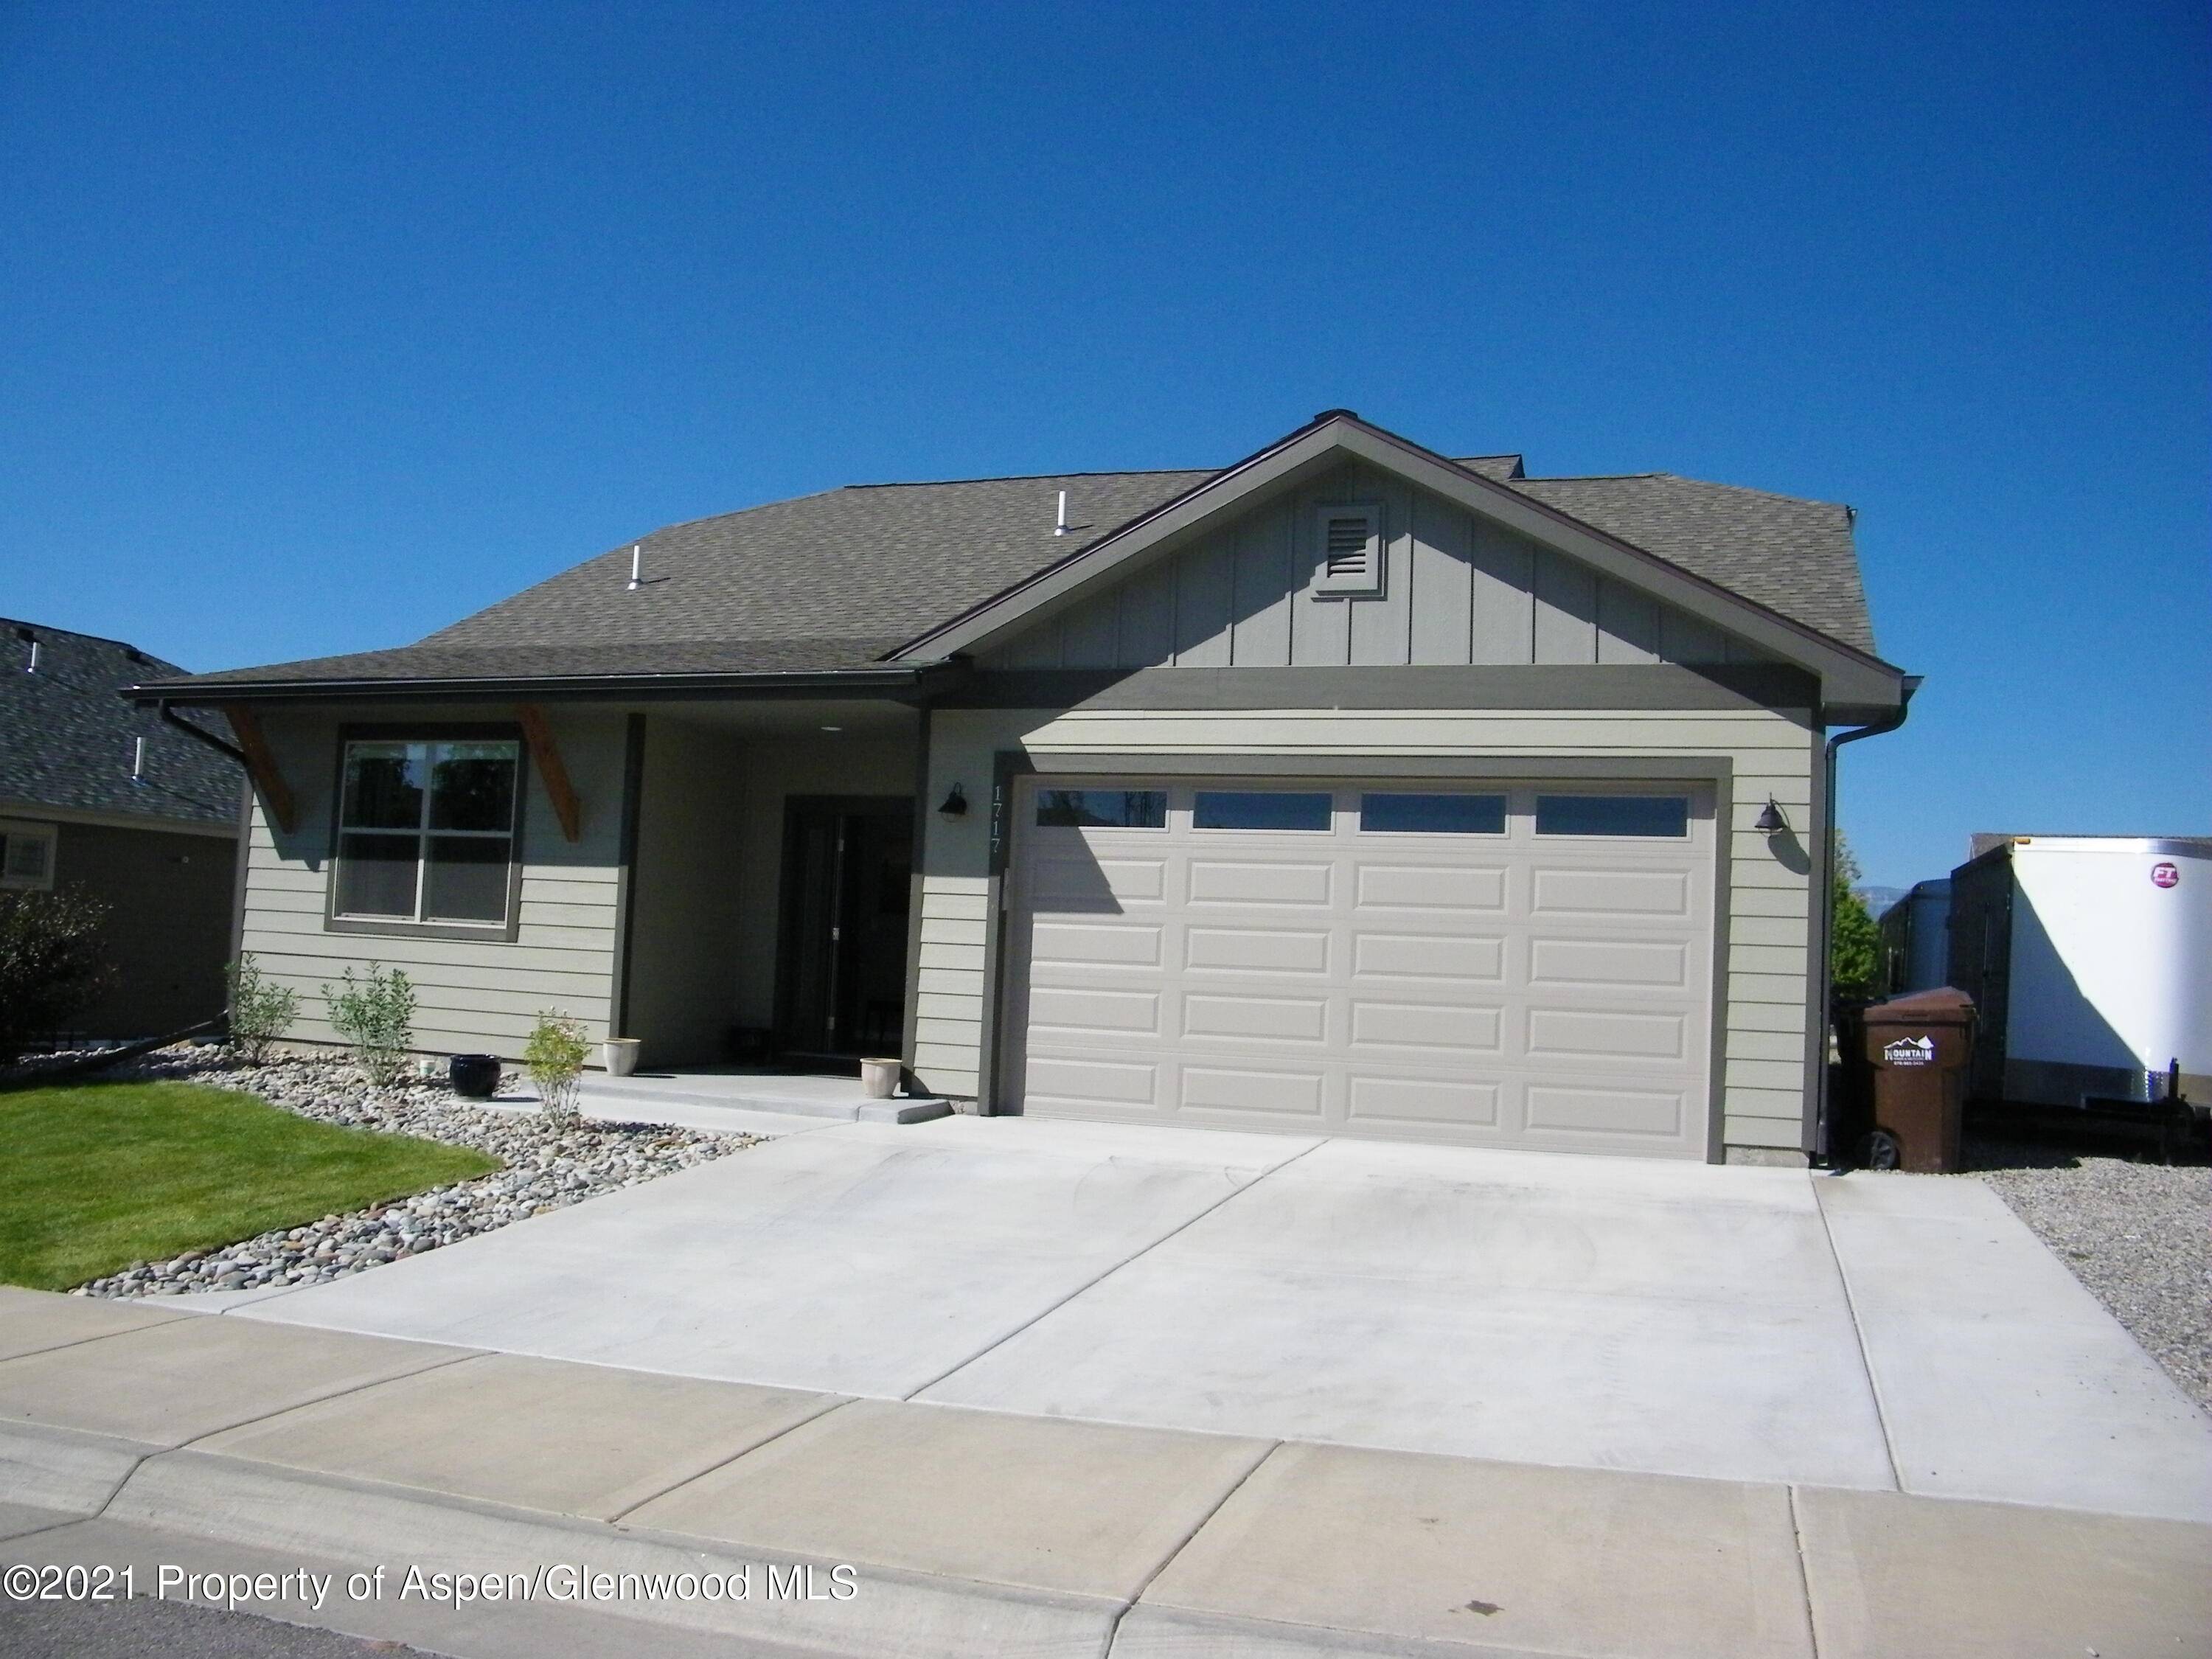 Ranch style home in Iron Horse Mesa subdivision.